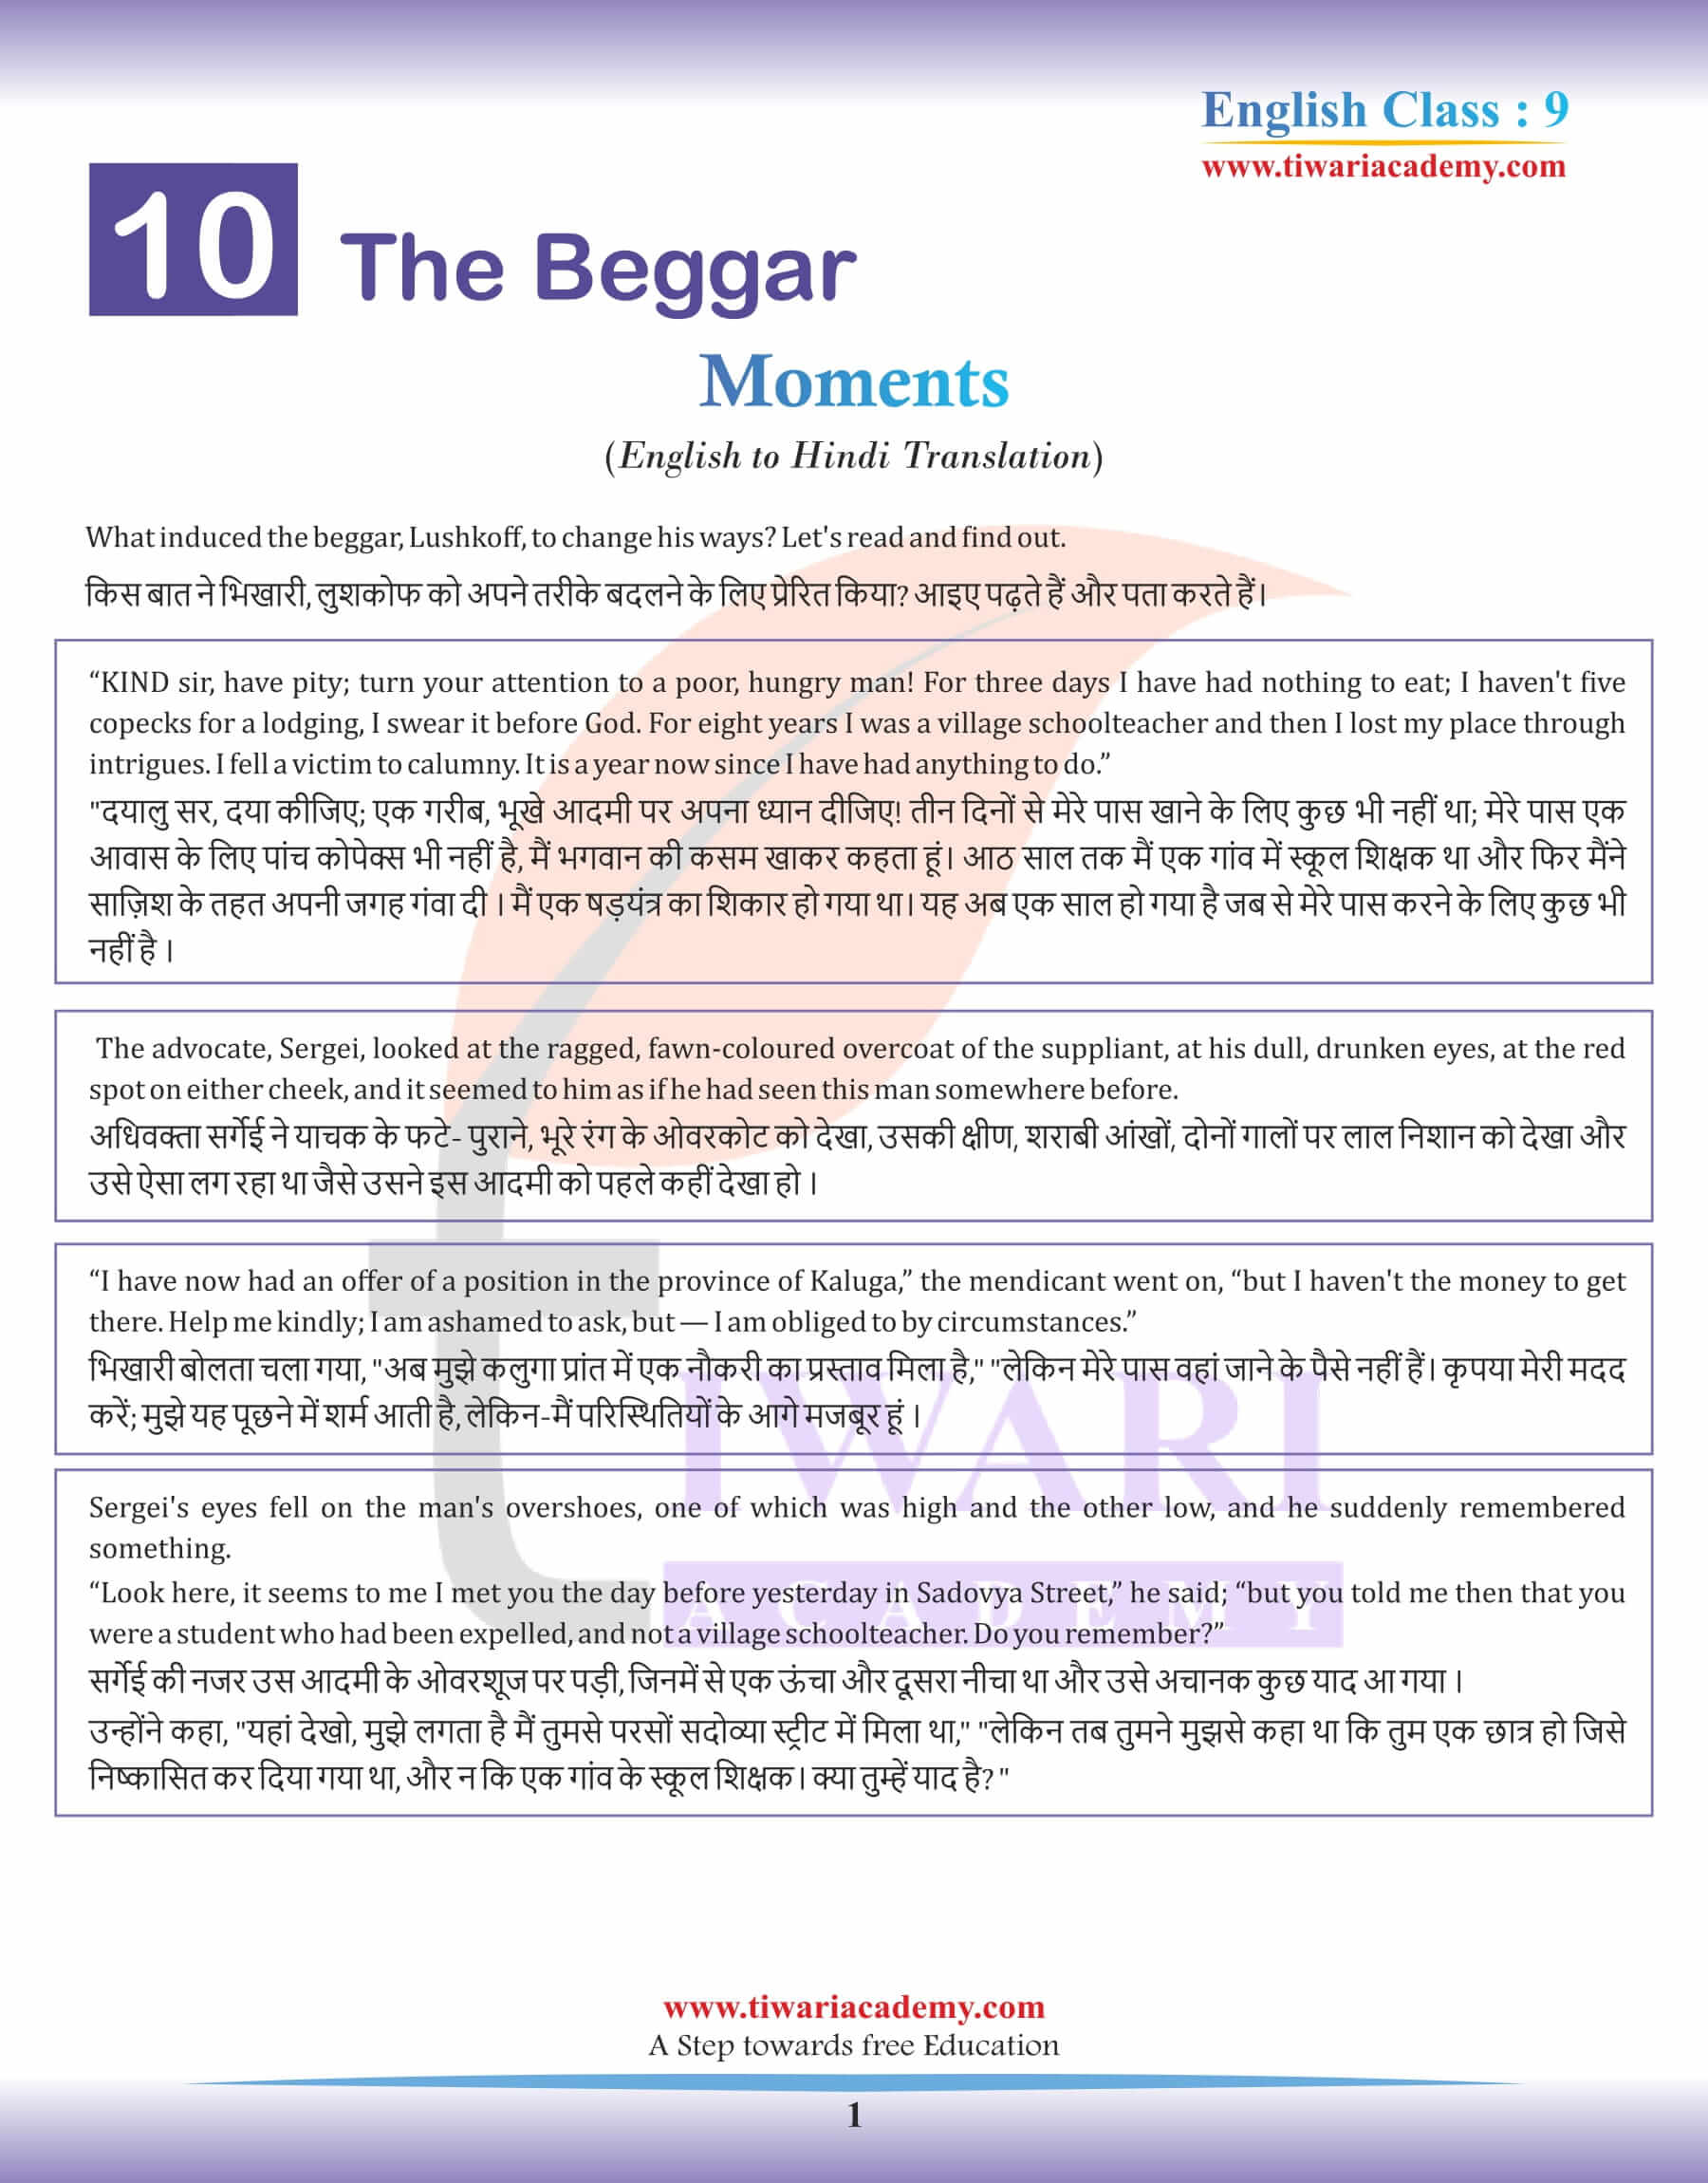 Class 9 English Moments Chapter 10 the Beggar